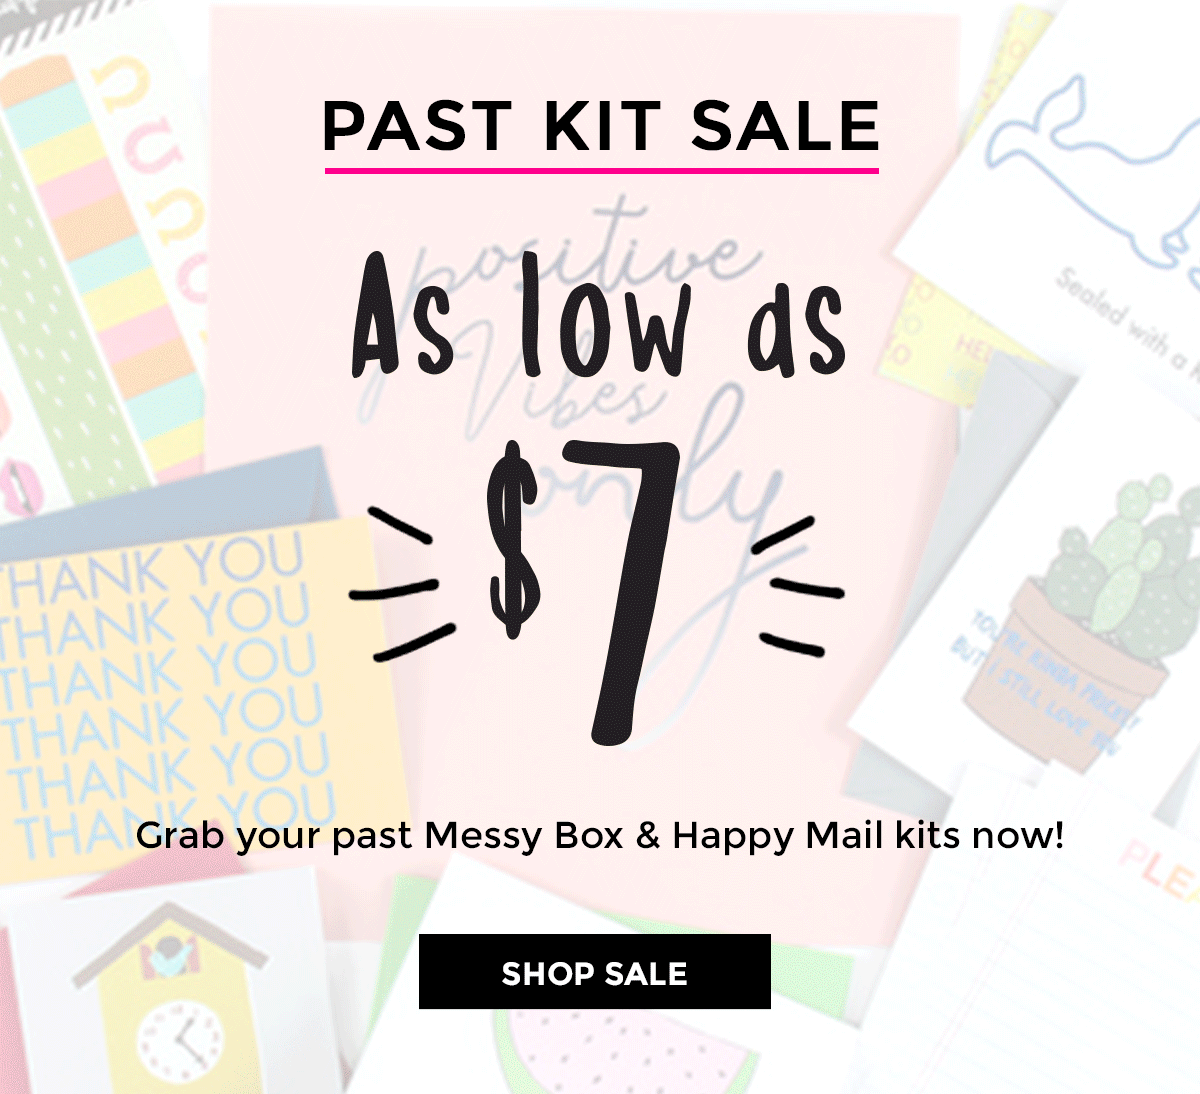 Past Happy Mail & Messy Box Kits On Sale For $7!